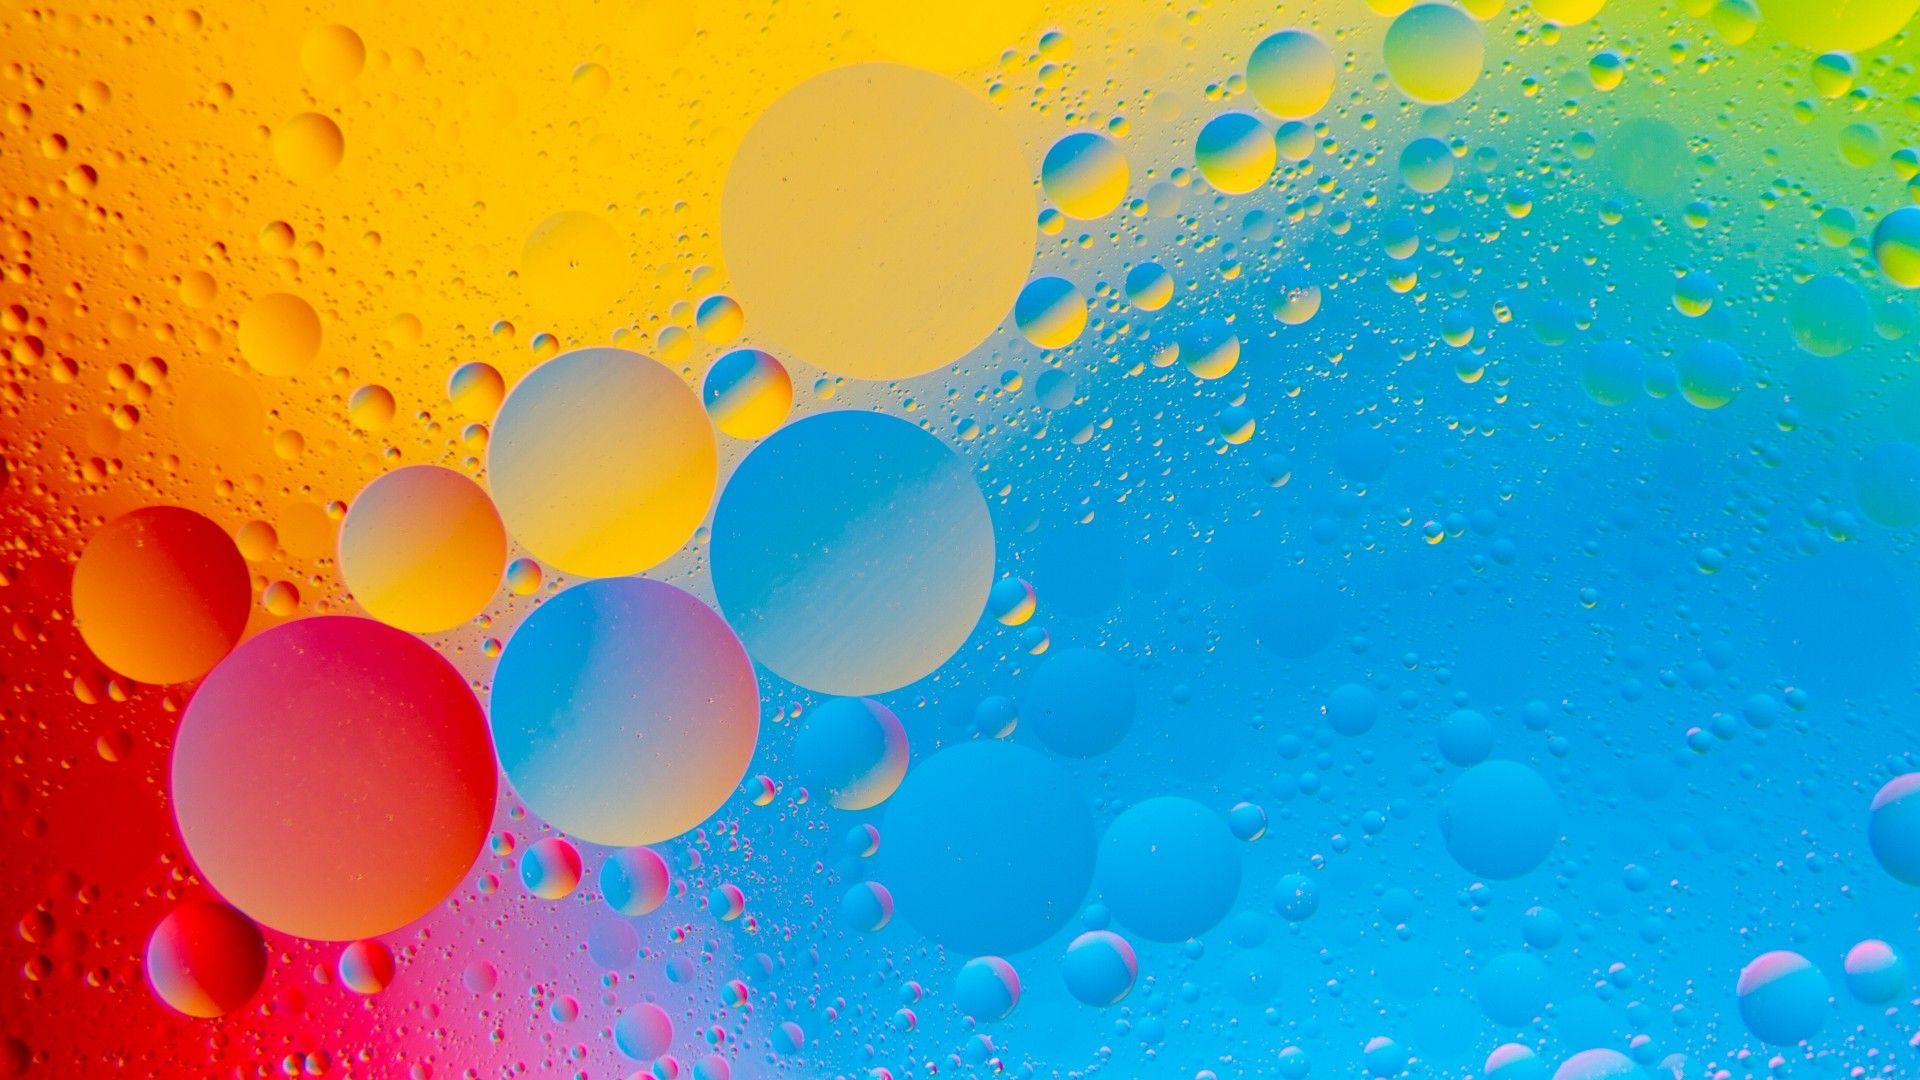 Colourful Bubbles 4K HD Abstract Wallpaper iPhone 7 Plus / iPhone 8